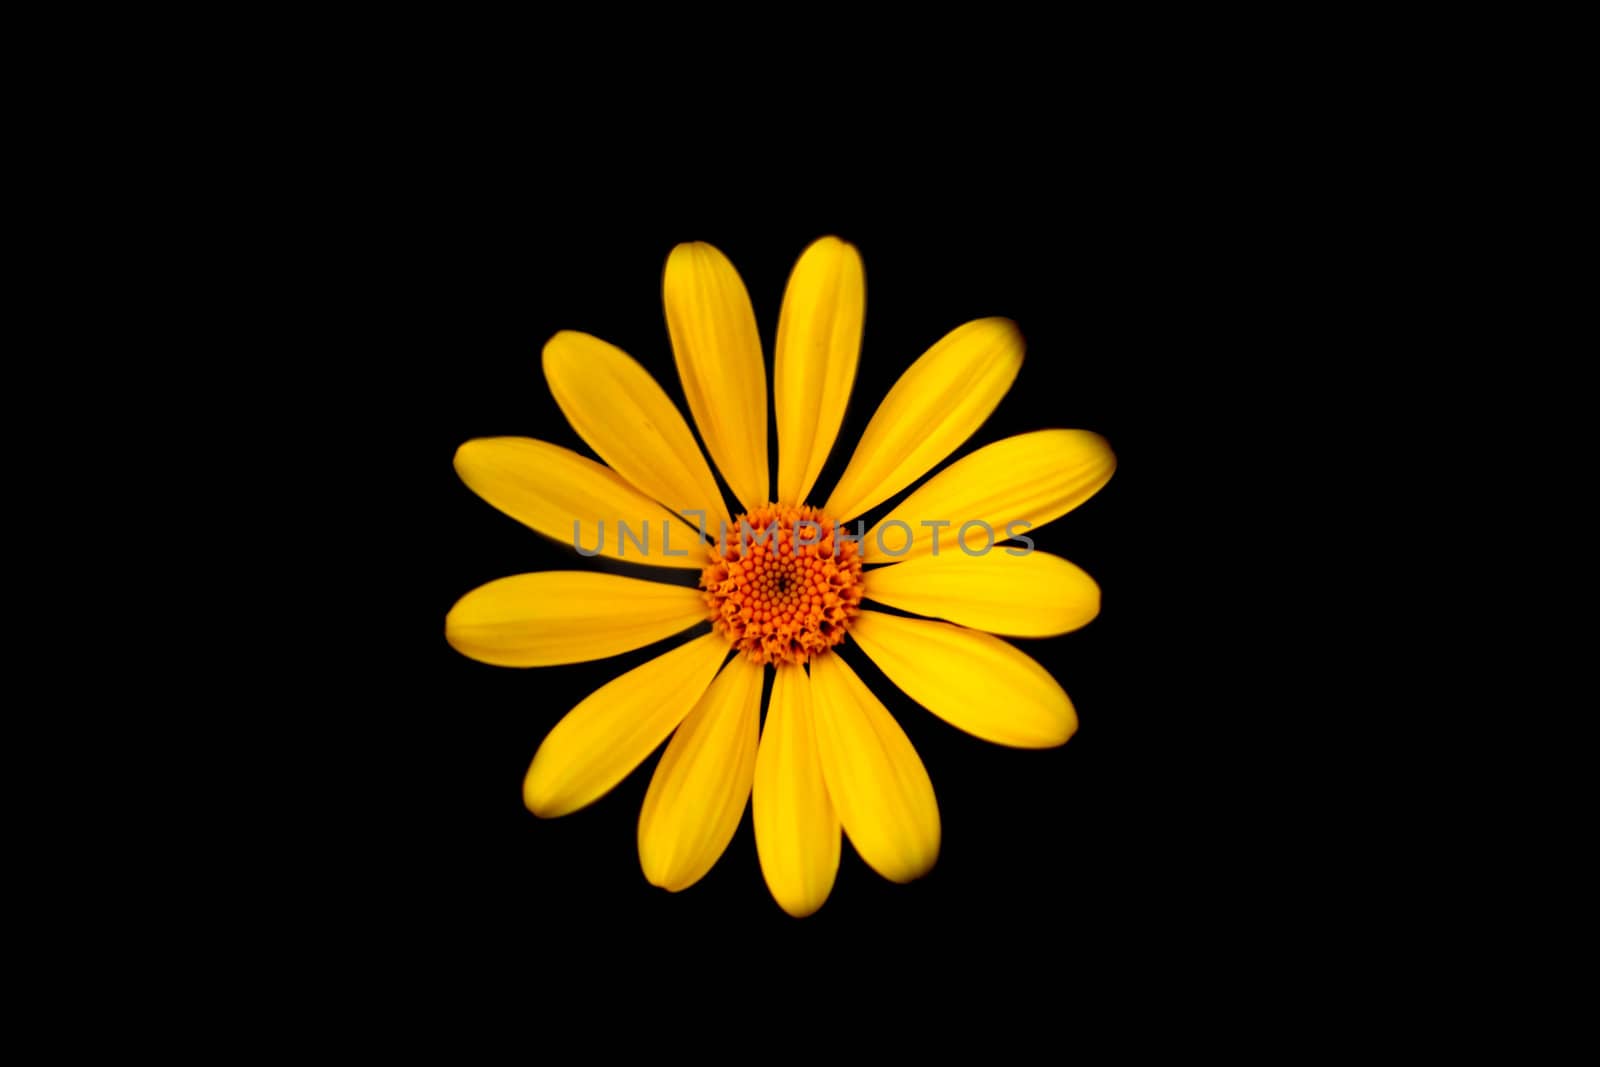 Yellow daisy (Bellis Perennis) on black isolated background